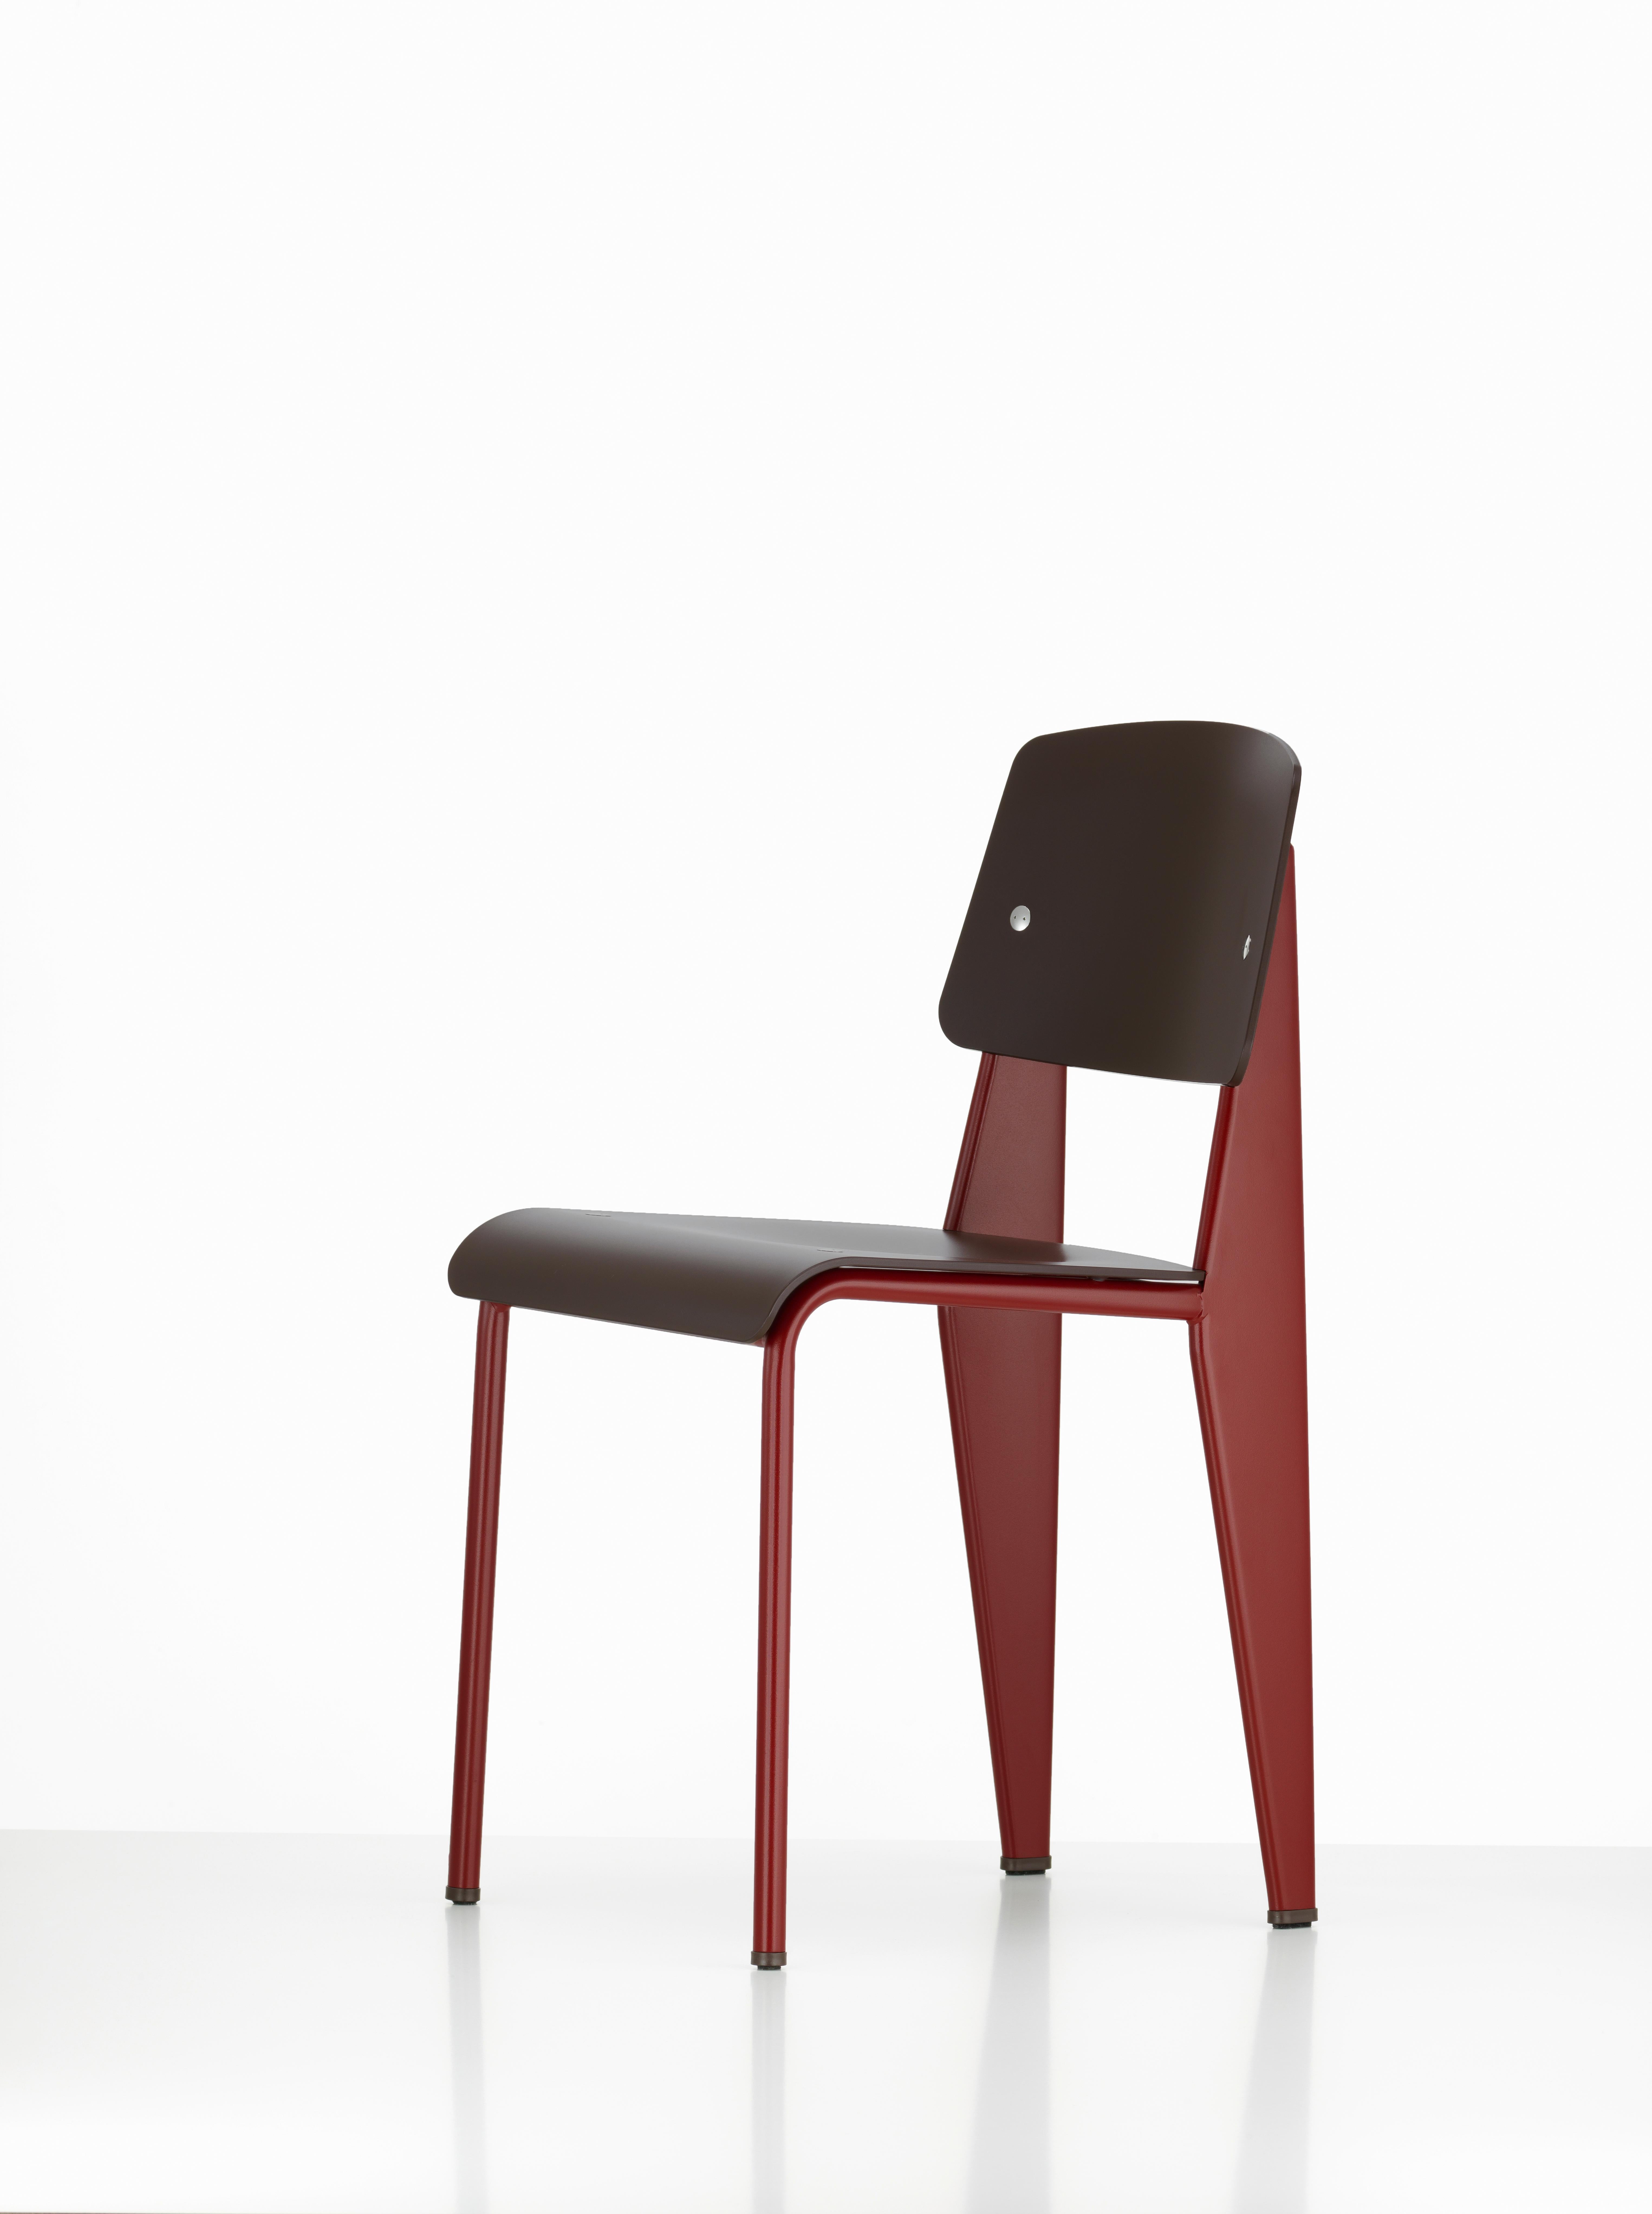 Swiss Jean Prouvé Standard Chair SP in Teak Brown and Mint for Vitra